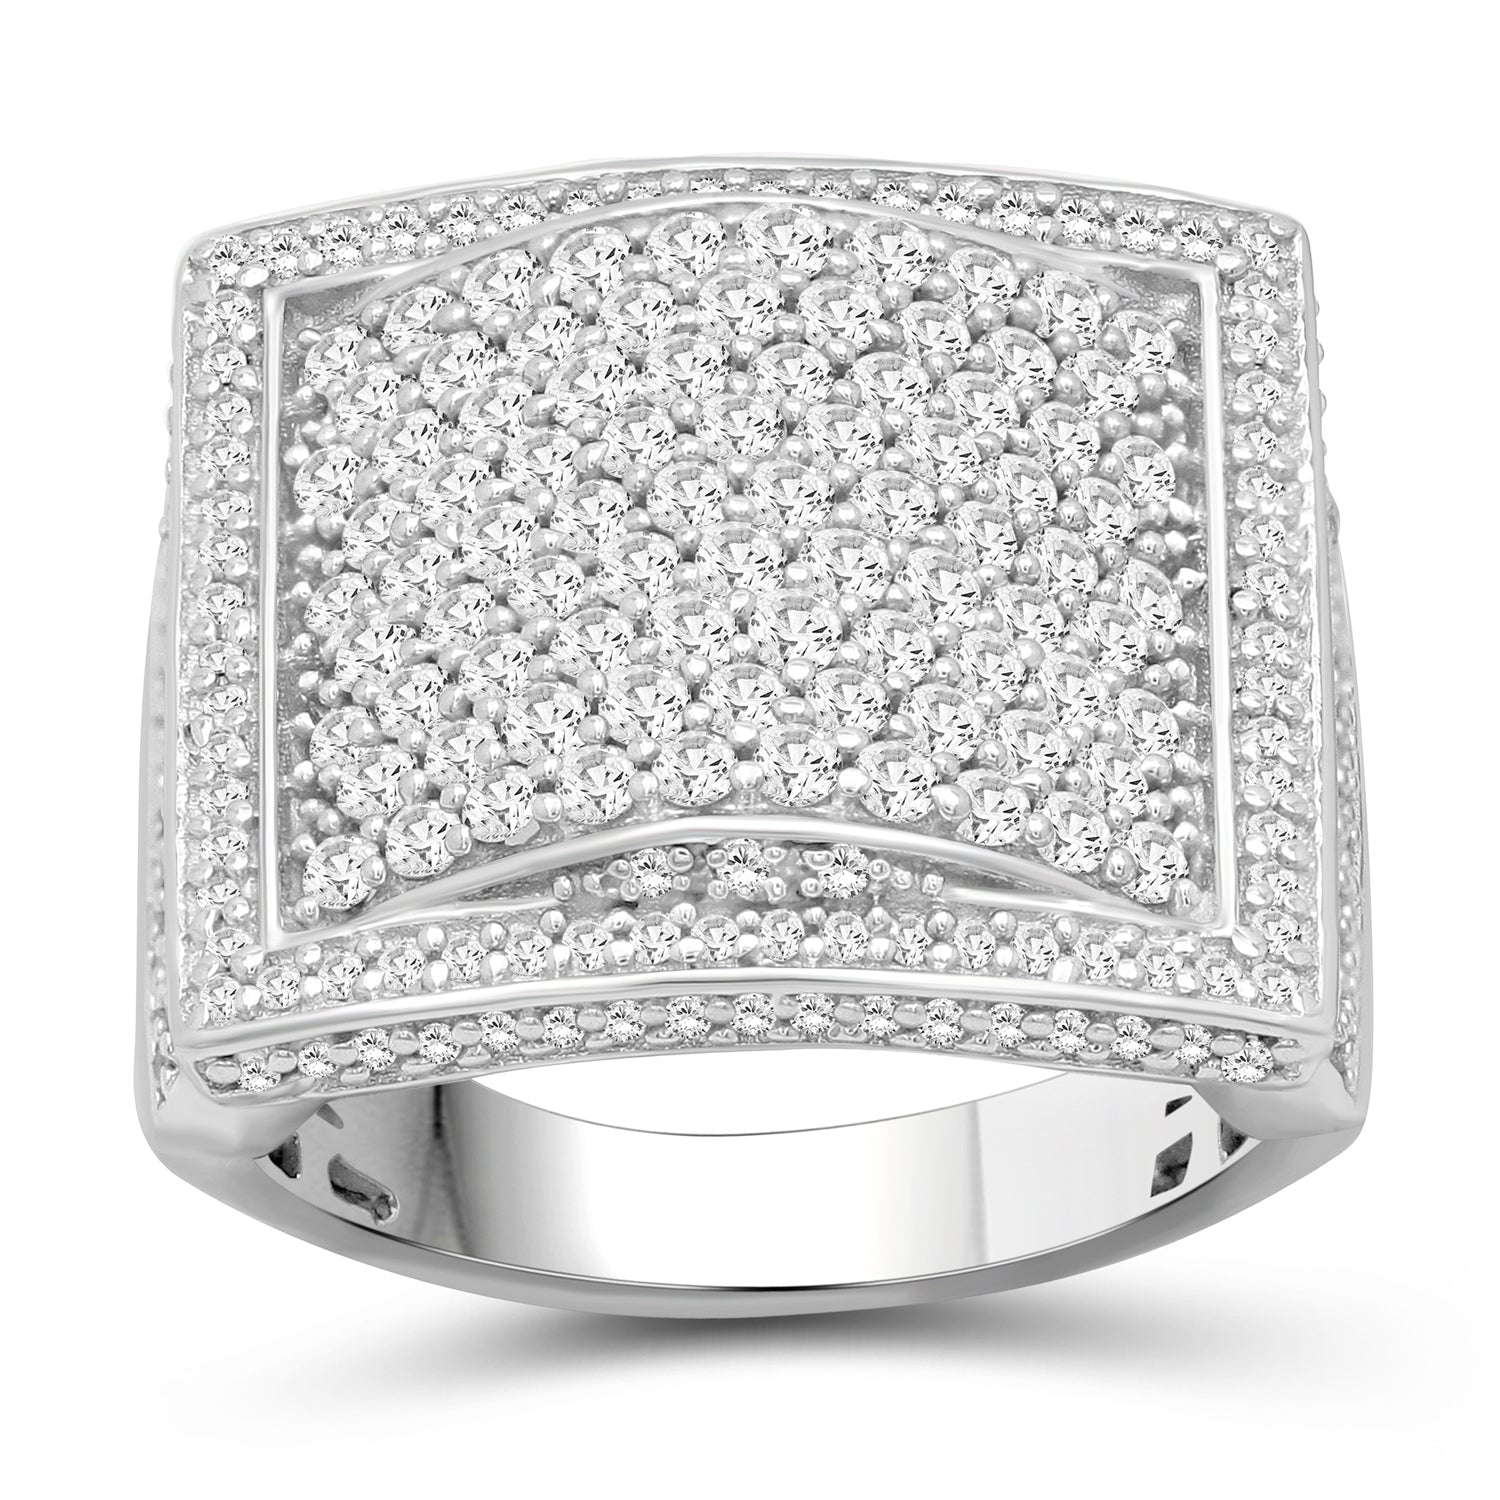 White Diamond 2.50 Carat Ring with Sterling Silver for Women & Girls | Square Halo Promise Ring with Round Cut Diamonds